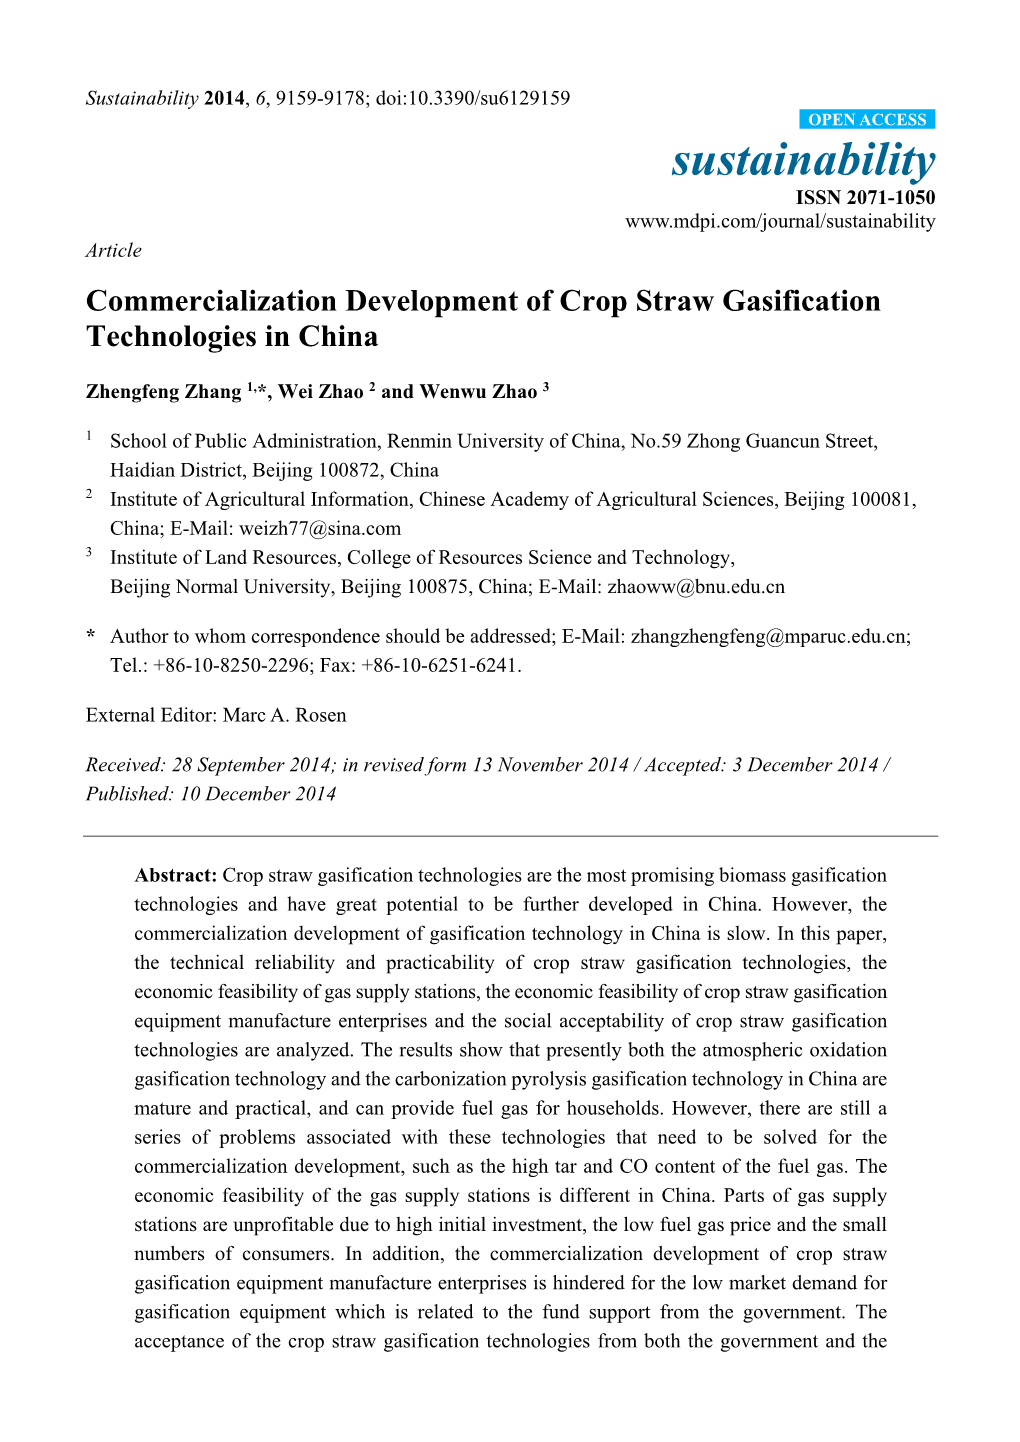 Commercialization Development of Crop Straw Gasification Technologies in China